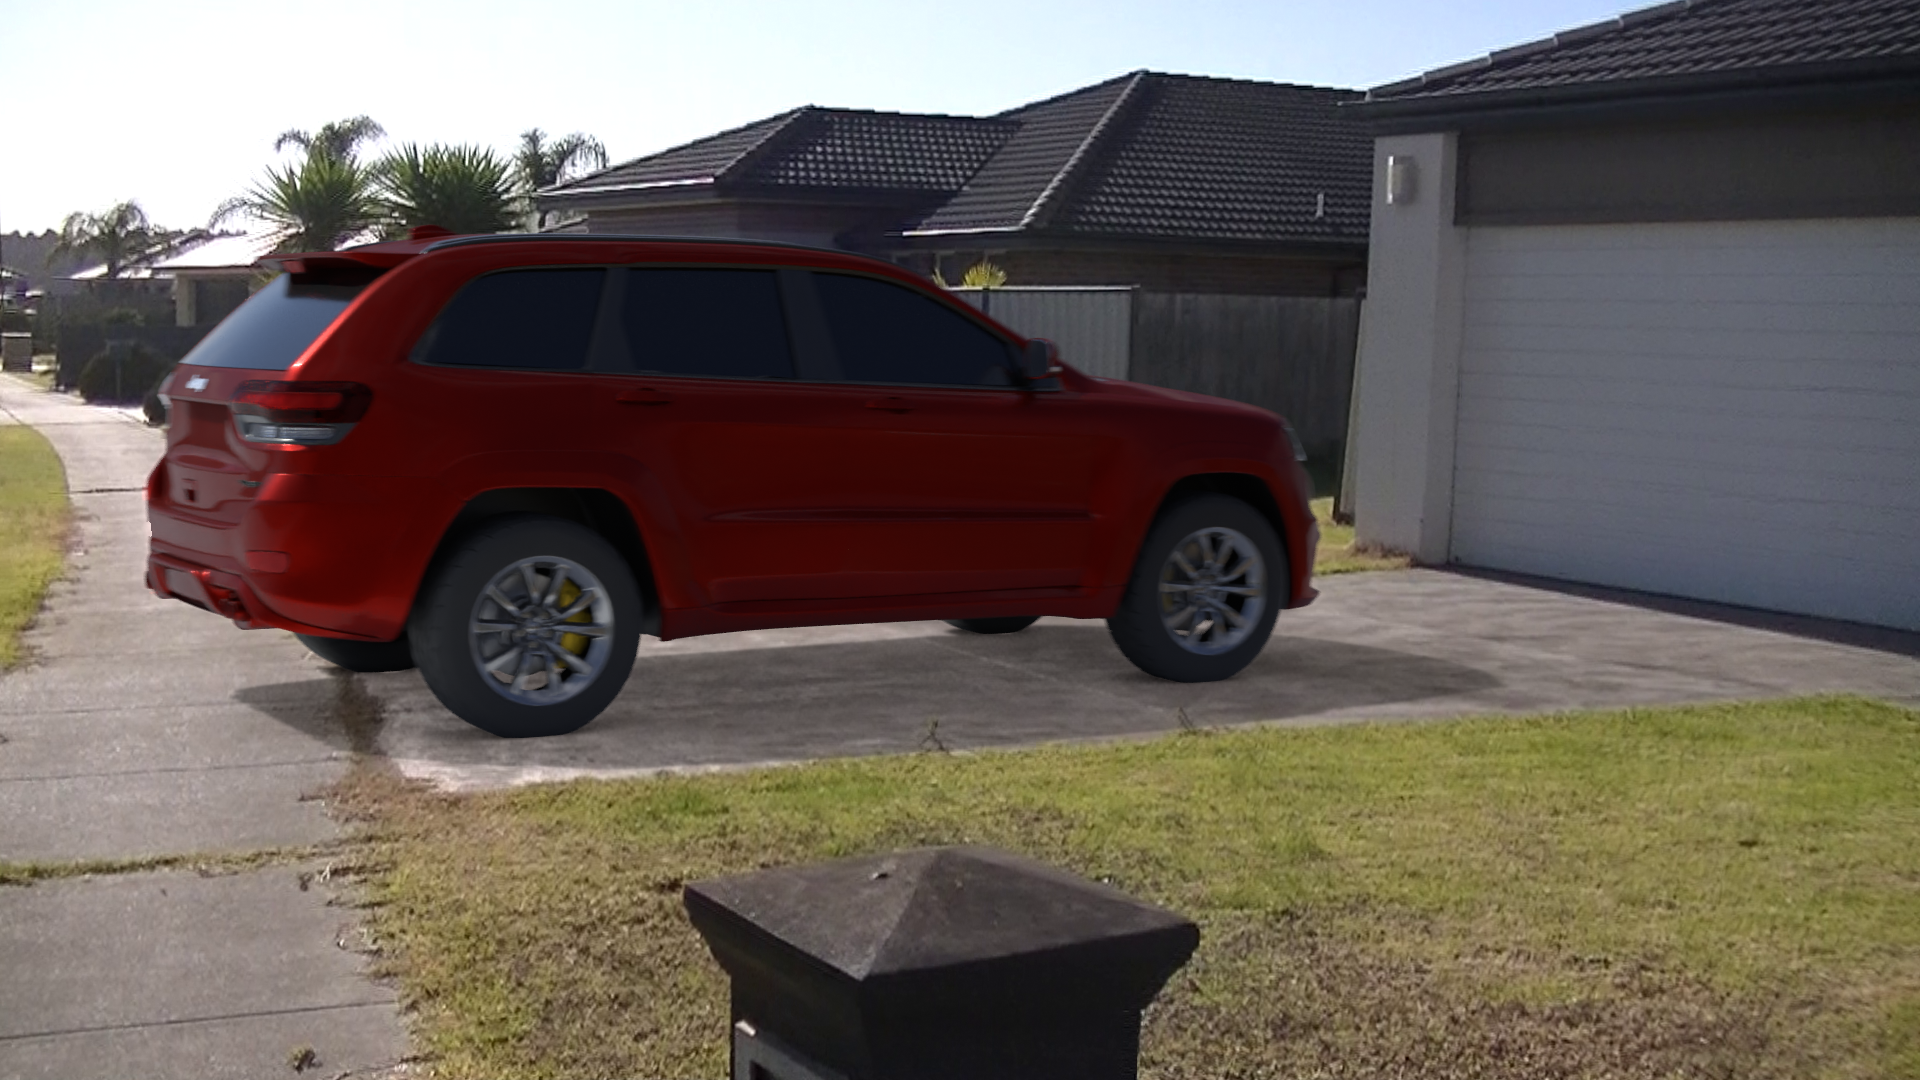 Jeep Cherokee with rig preview image 1